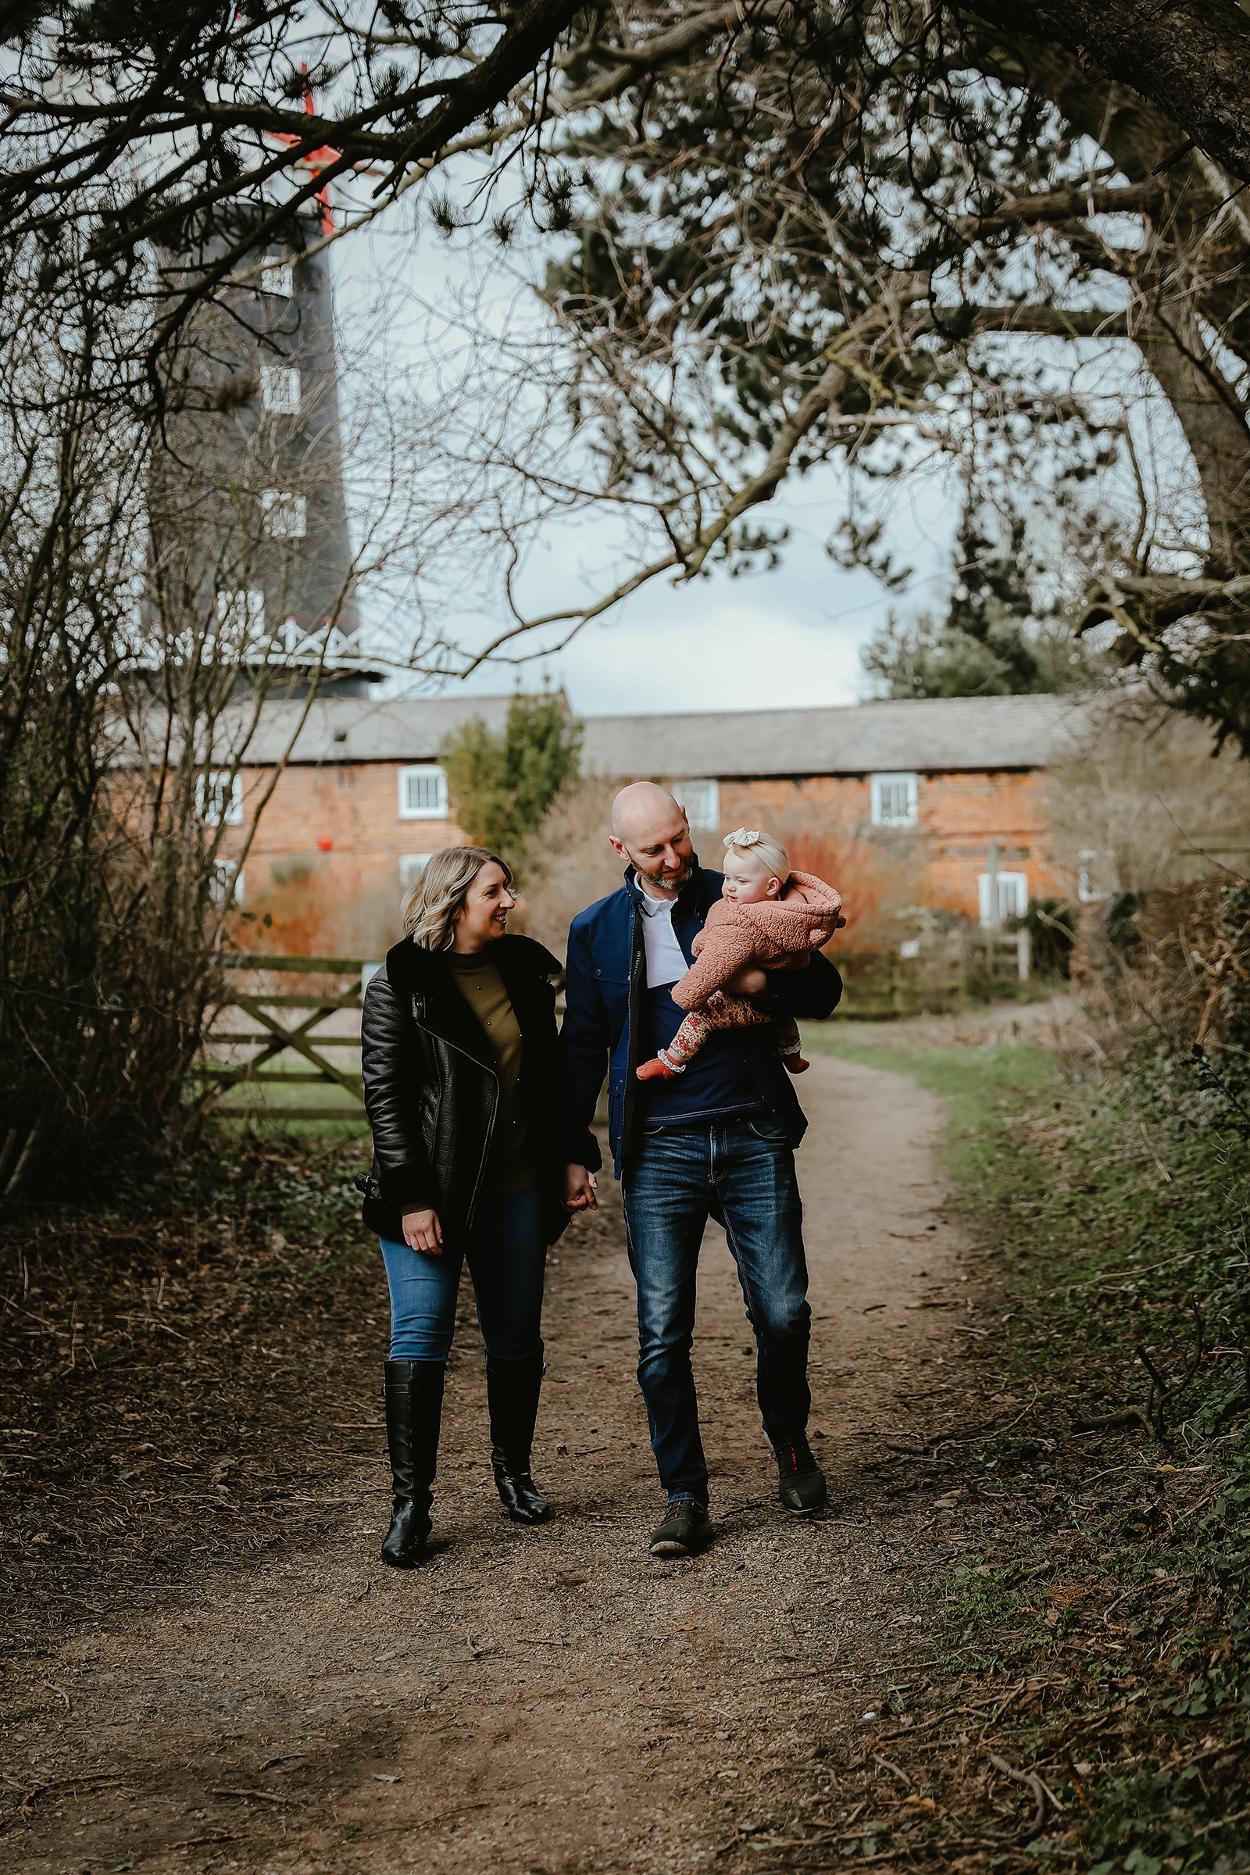 Skidby Mill Photographer, Family Photographer North Lincolnshire, Family Photo Session Hull, Hull Photographer, Yorkshire Wedding Photographer, North Lincolnshire Wedding Photographer